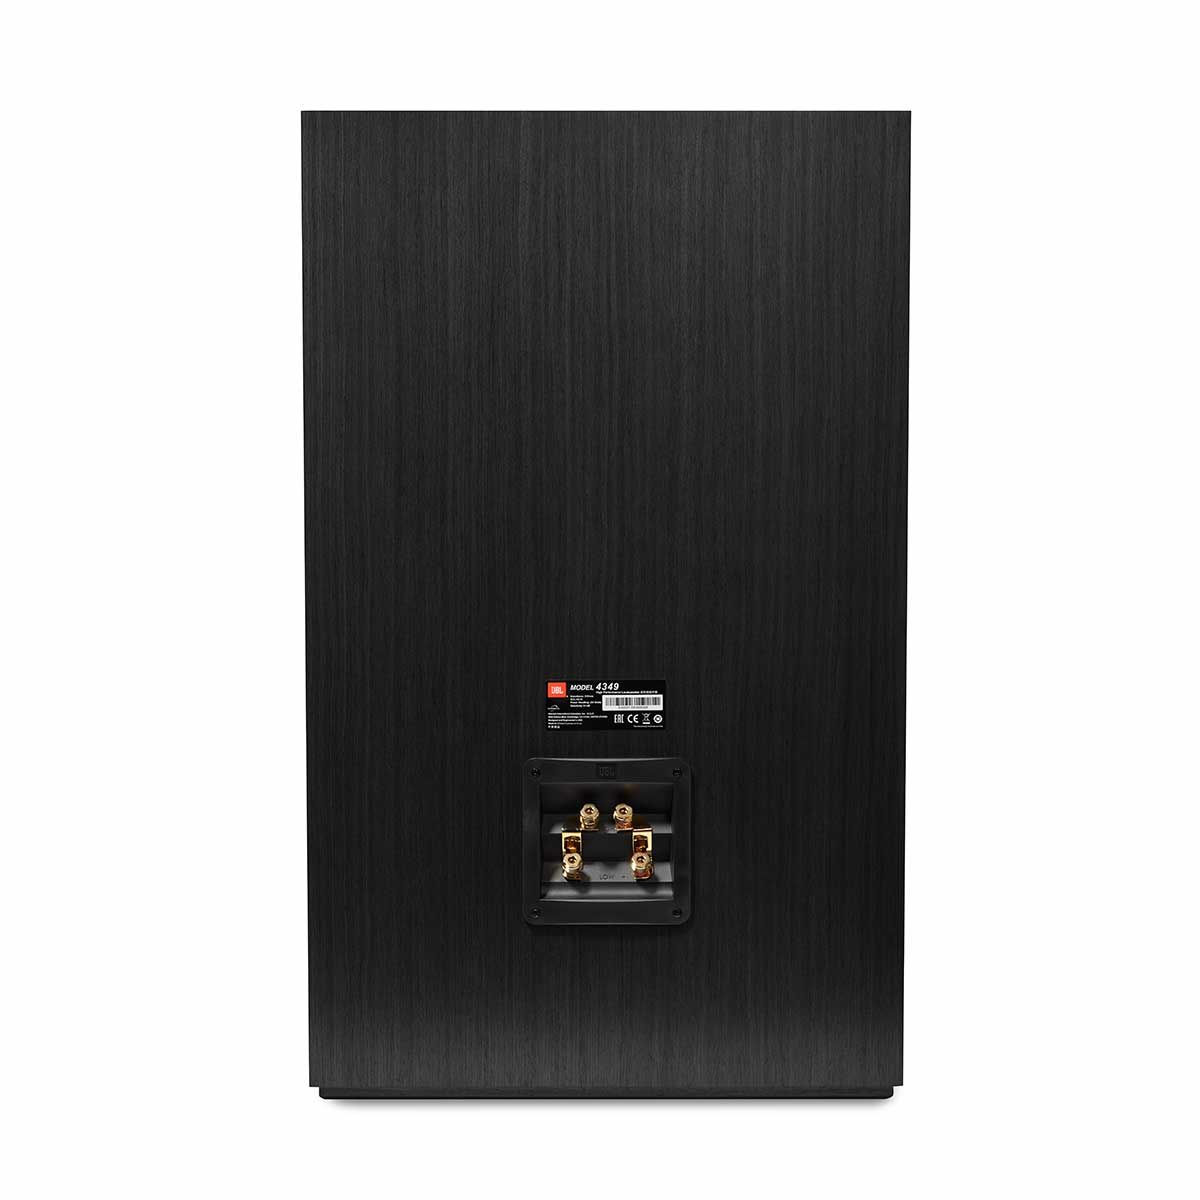 JBL Synthesis 4349 2-Way Studio Monitor, Black, rear view, detailed view of binding posts